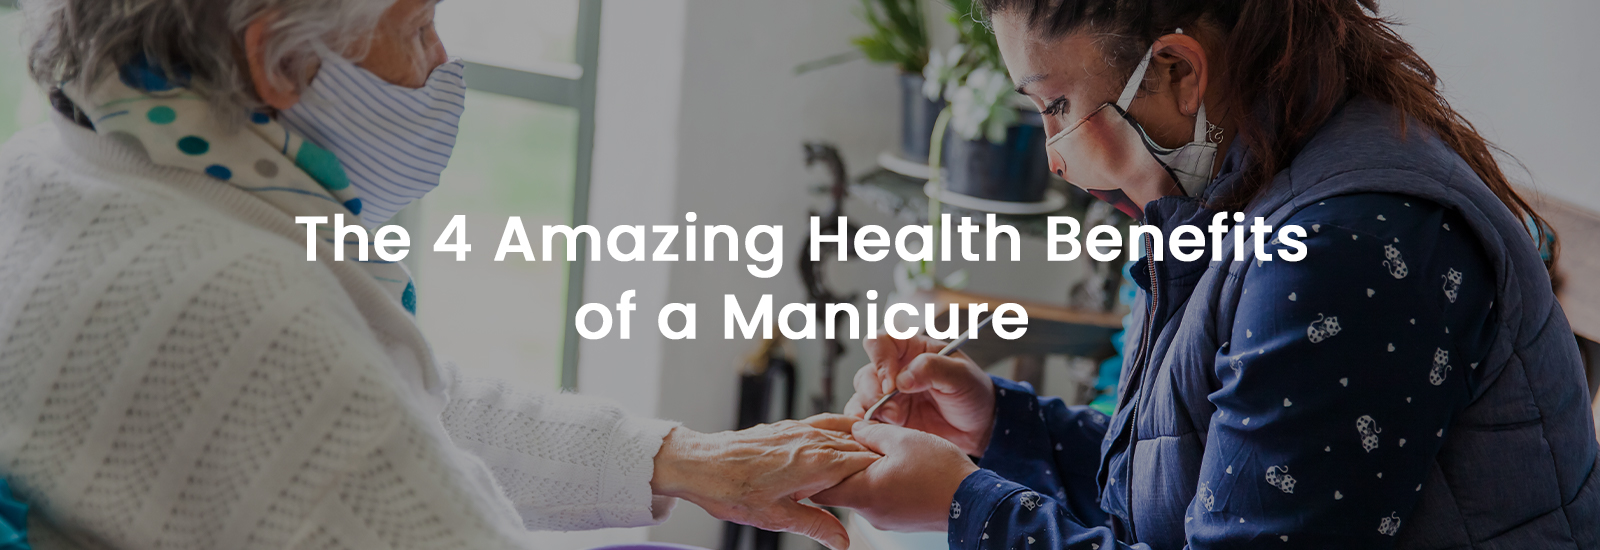 4 Important Health Benefits of Manicure |Banner Image